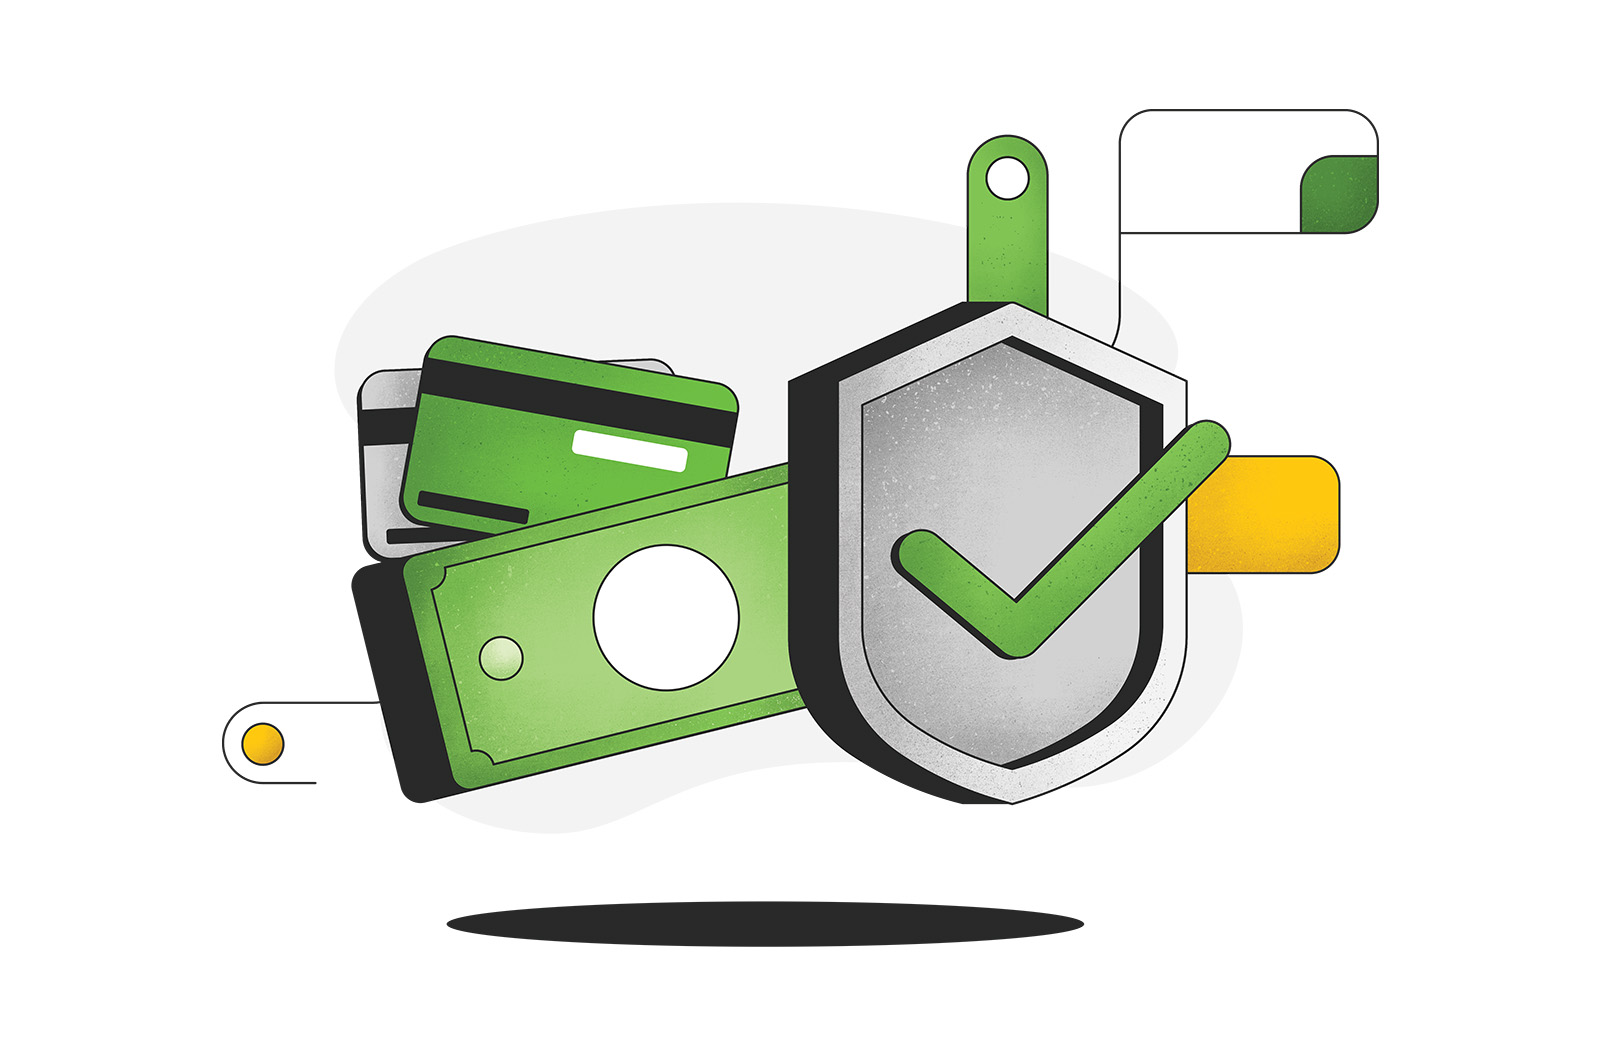 A solid shield icon with a green checkmark sits in front of some cash and credit cards.